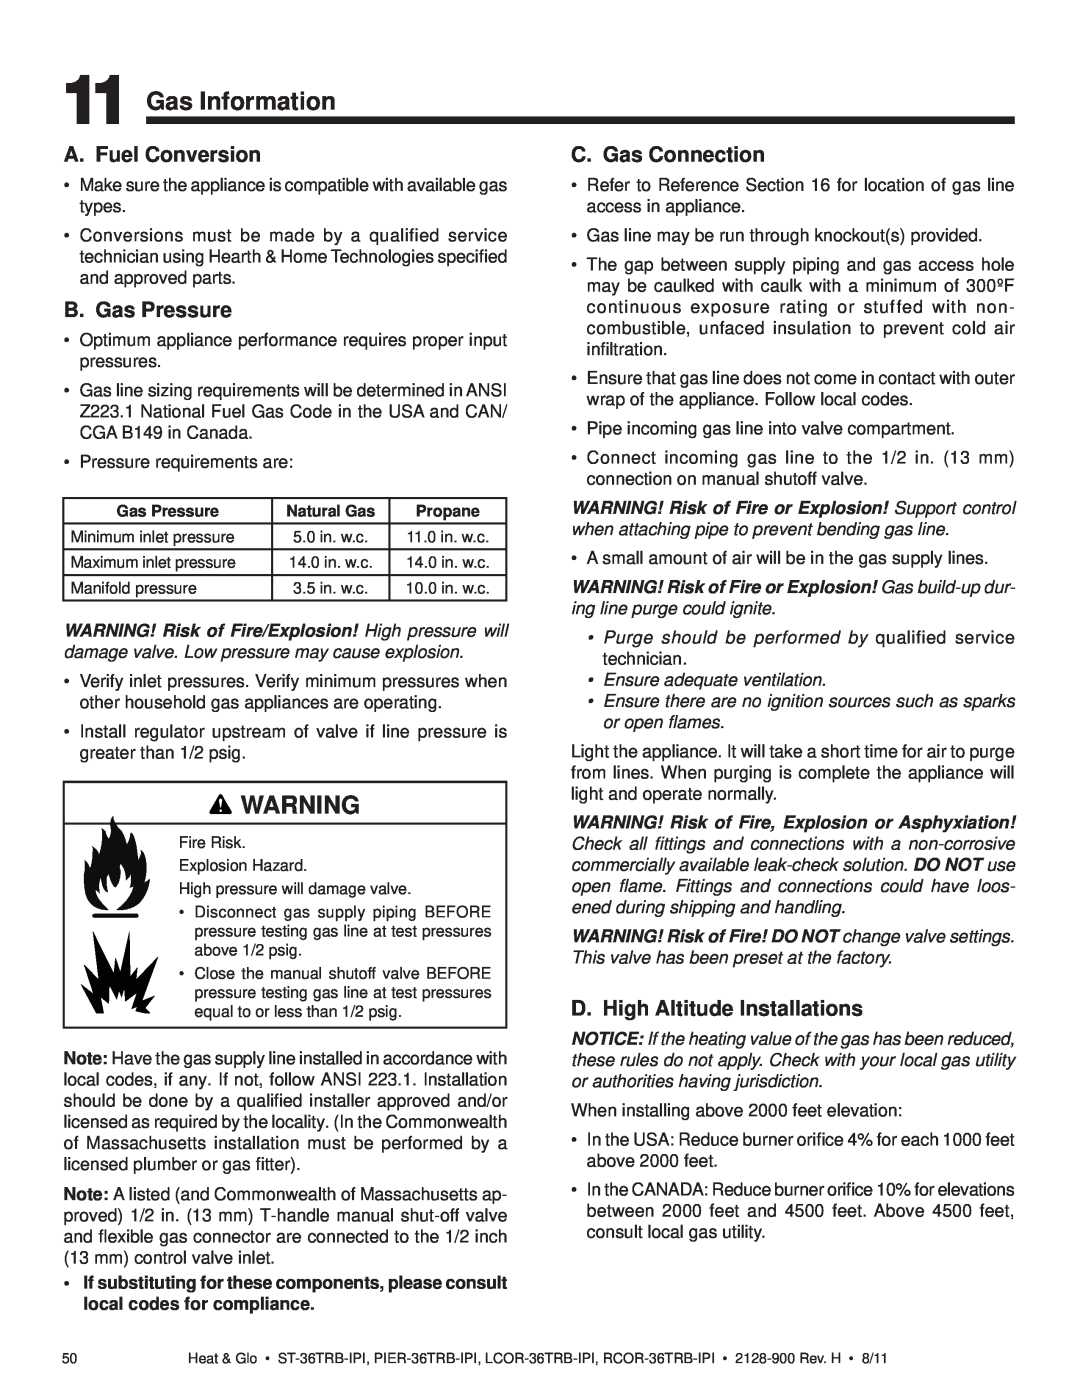 Heat & Glo LifeStyle ST-36TRB-IPI owner manual Gas Information, A. Fuel Conversion, B. Gas Pressure, C. Gas Connection 